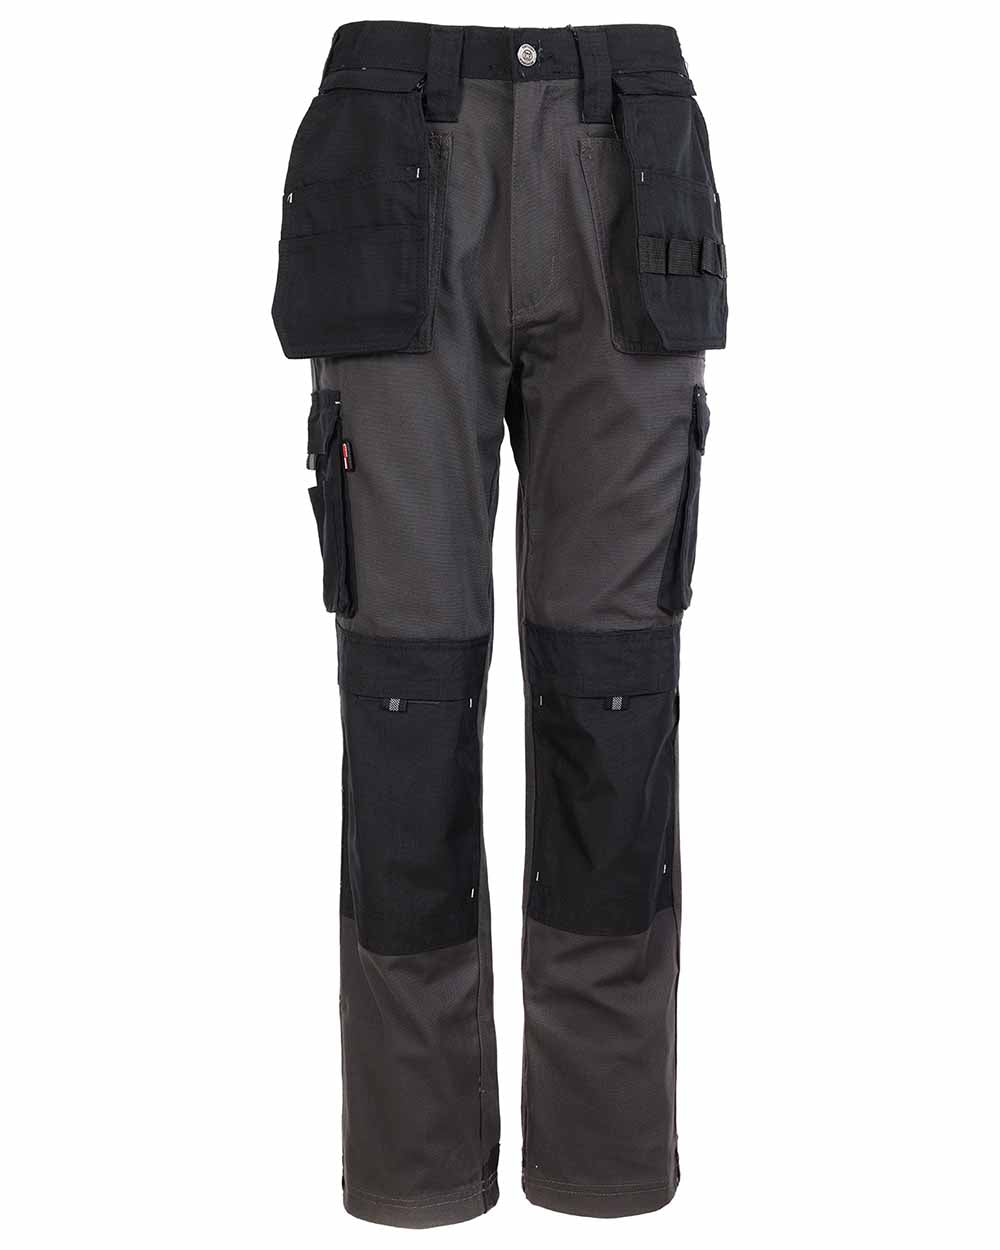 TuffStuff Extreme Work Trousers in Grey Black 